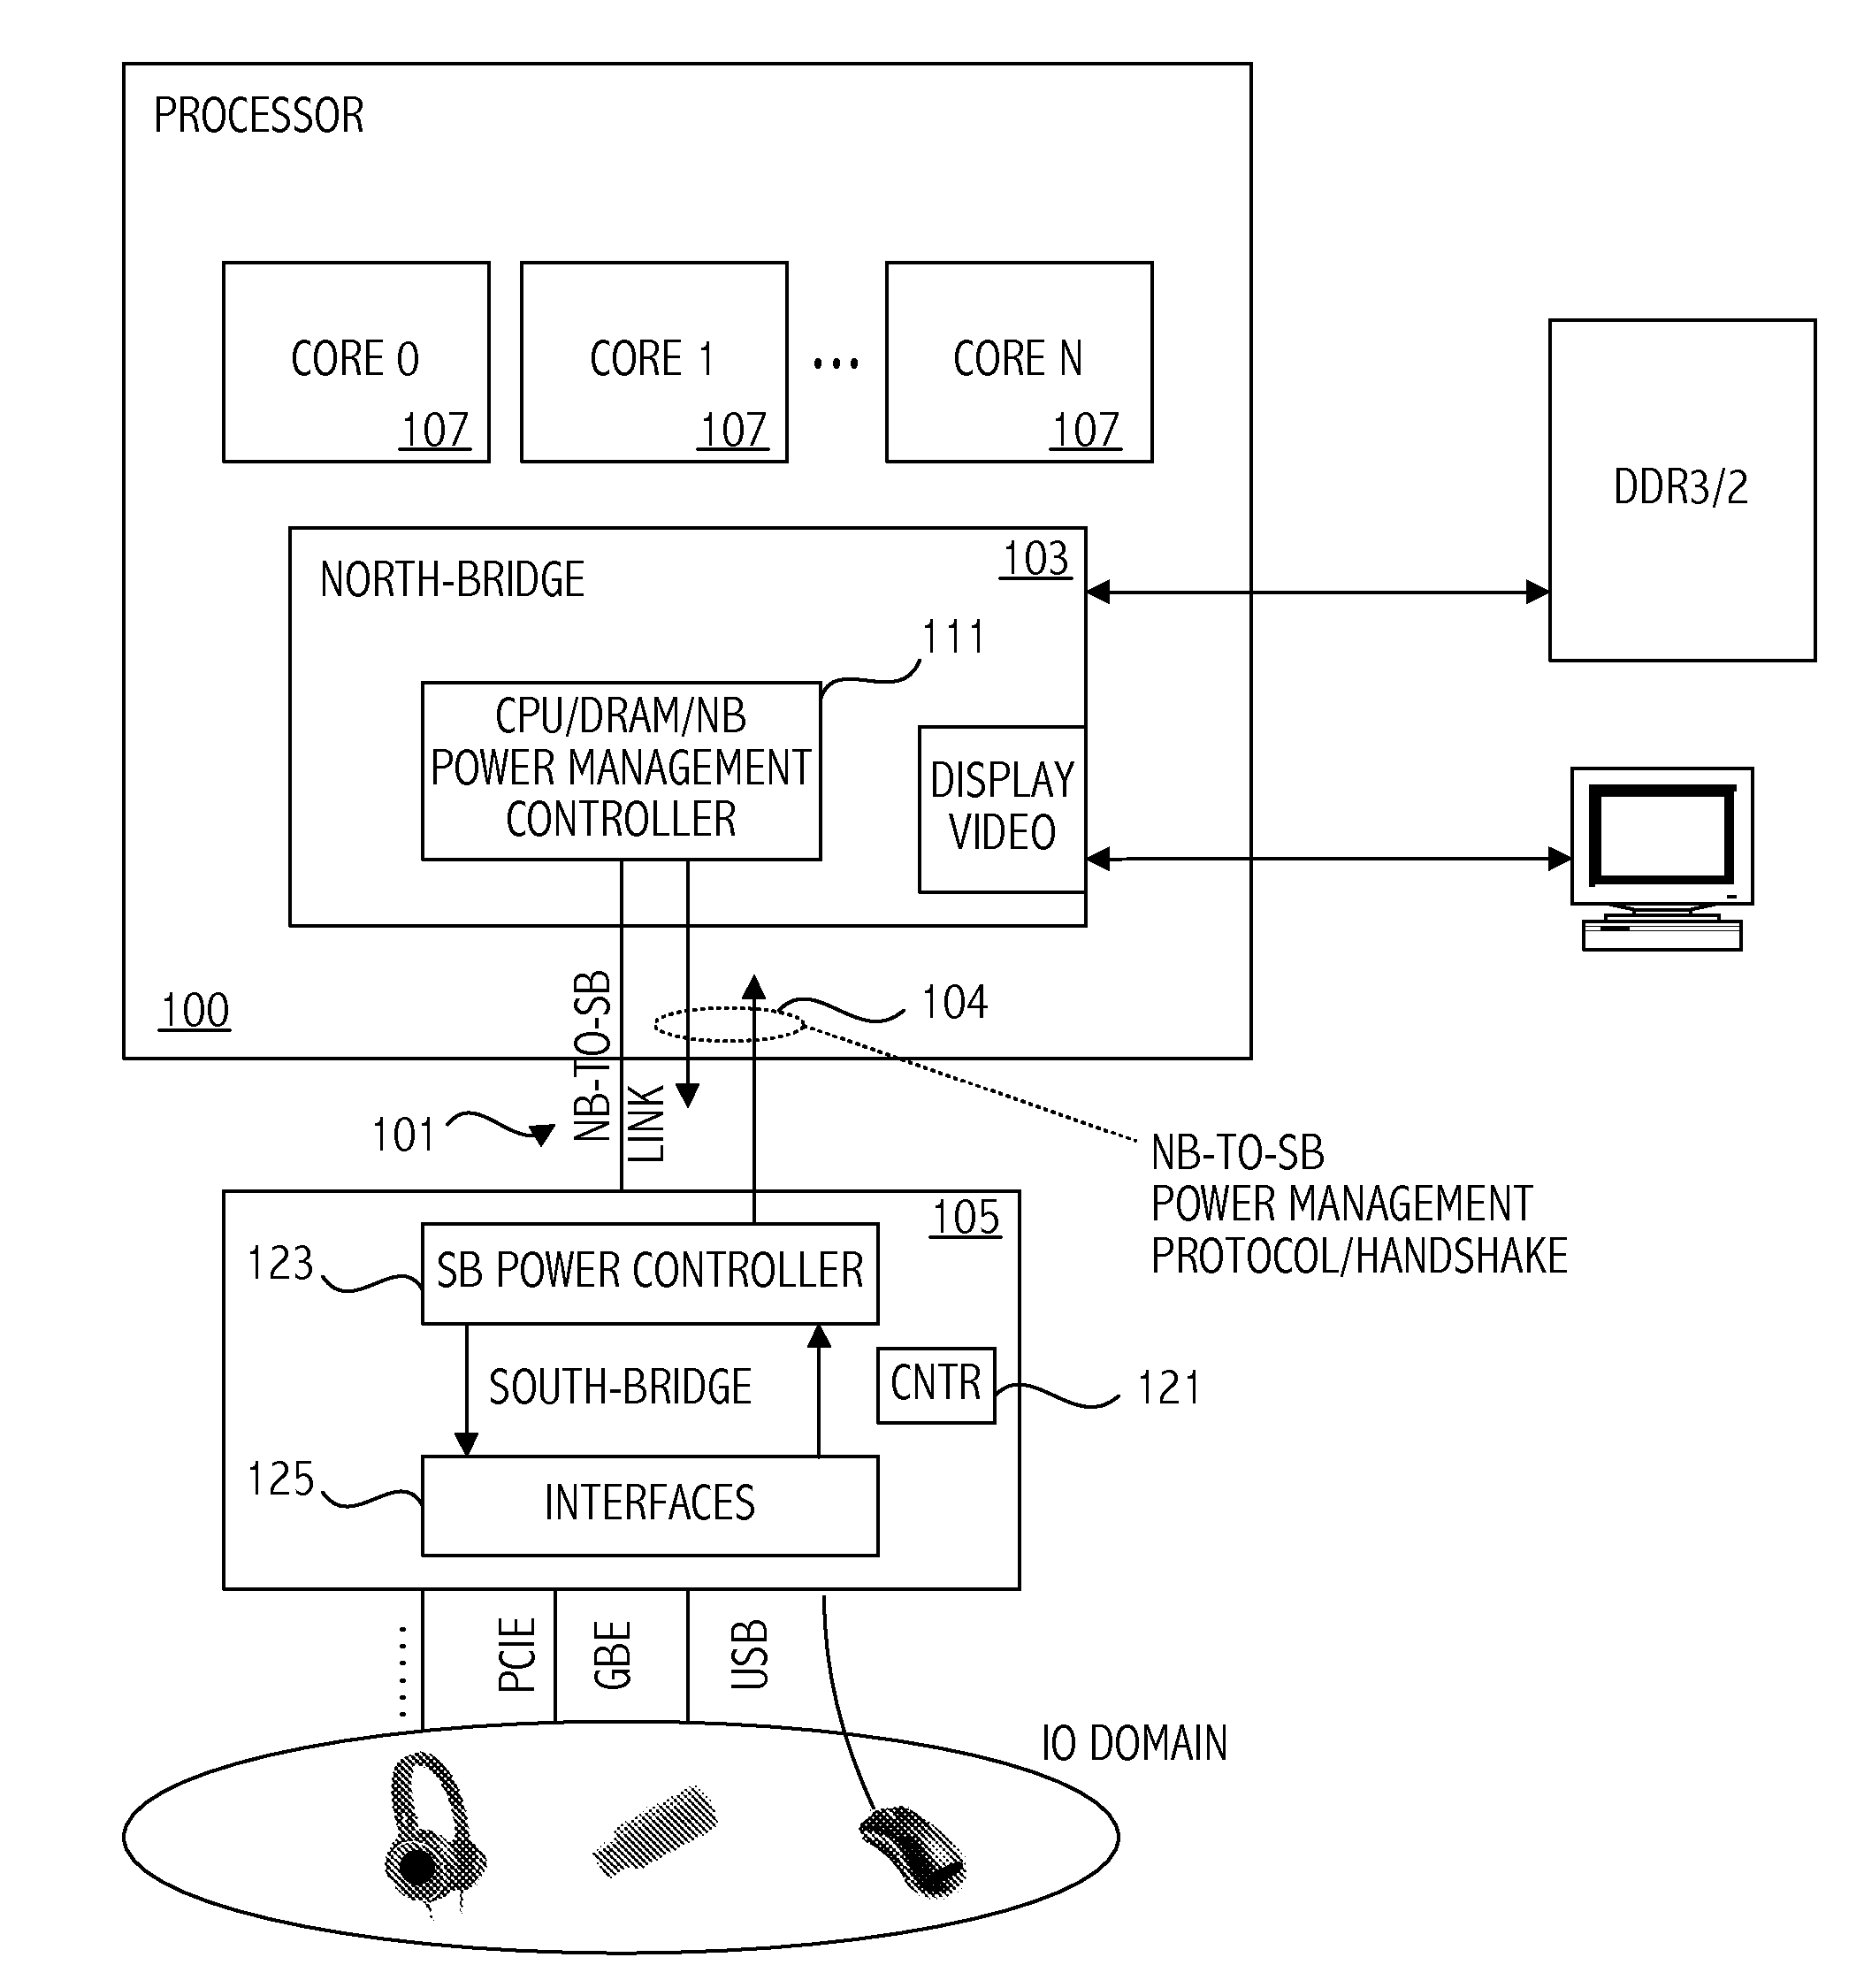 North-bridge to south-bridge protocol for placing processor in low power state